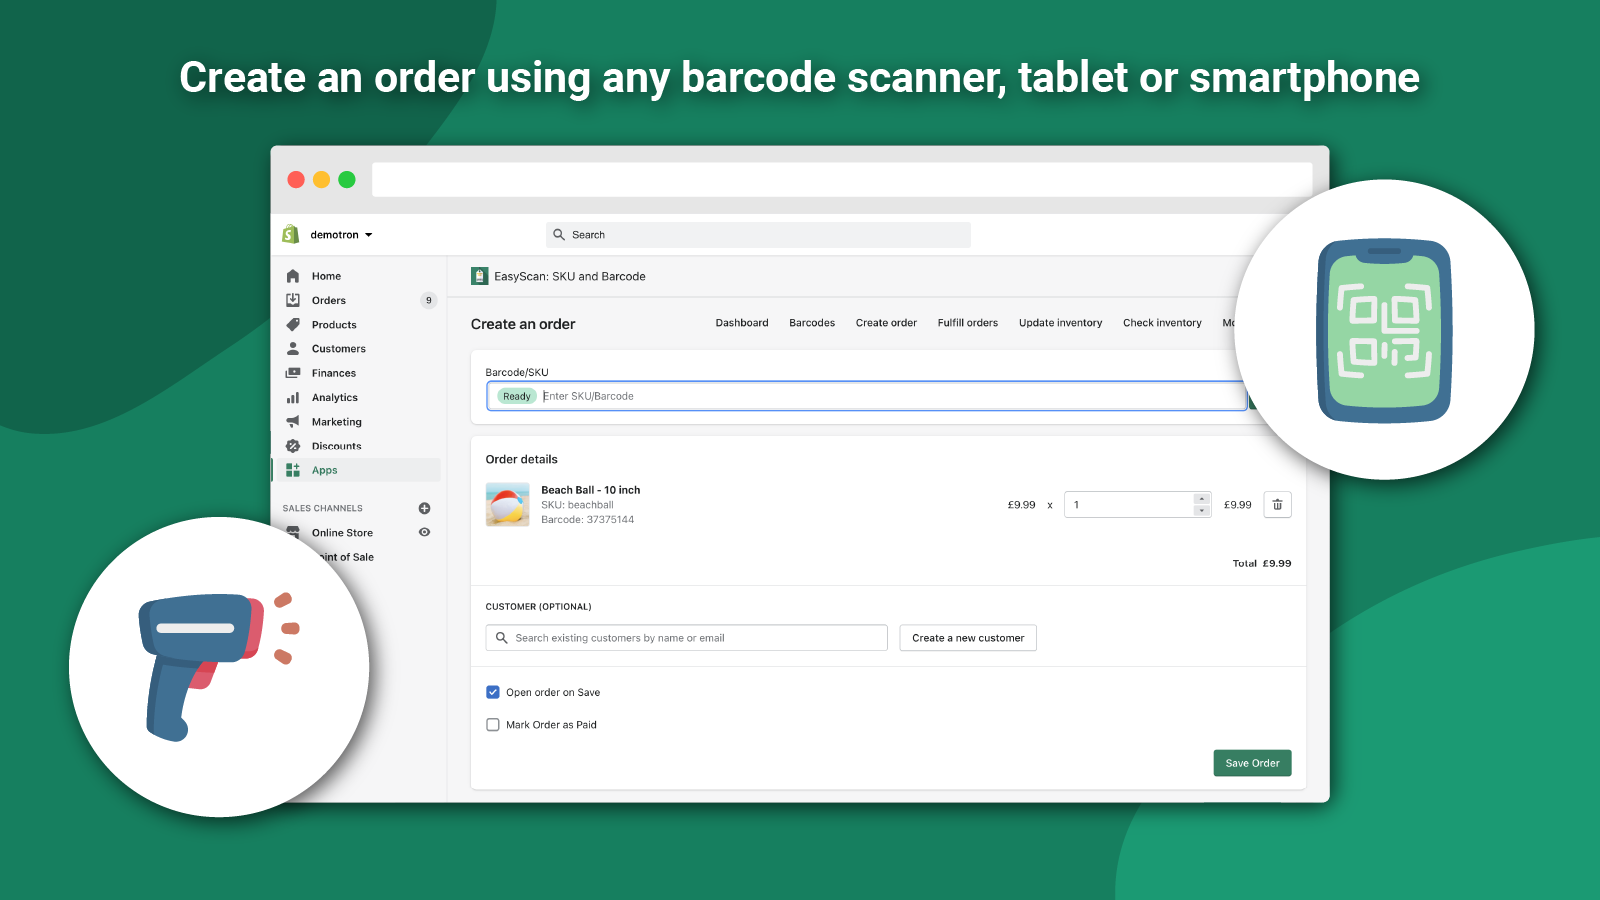 Create an order using a barcode scanner, tablet or smartphone